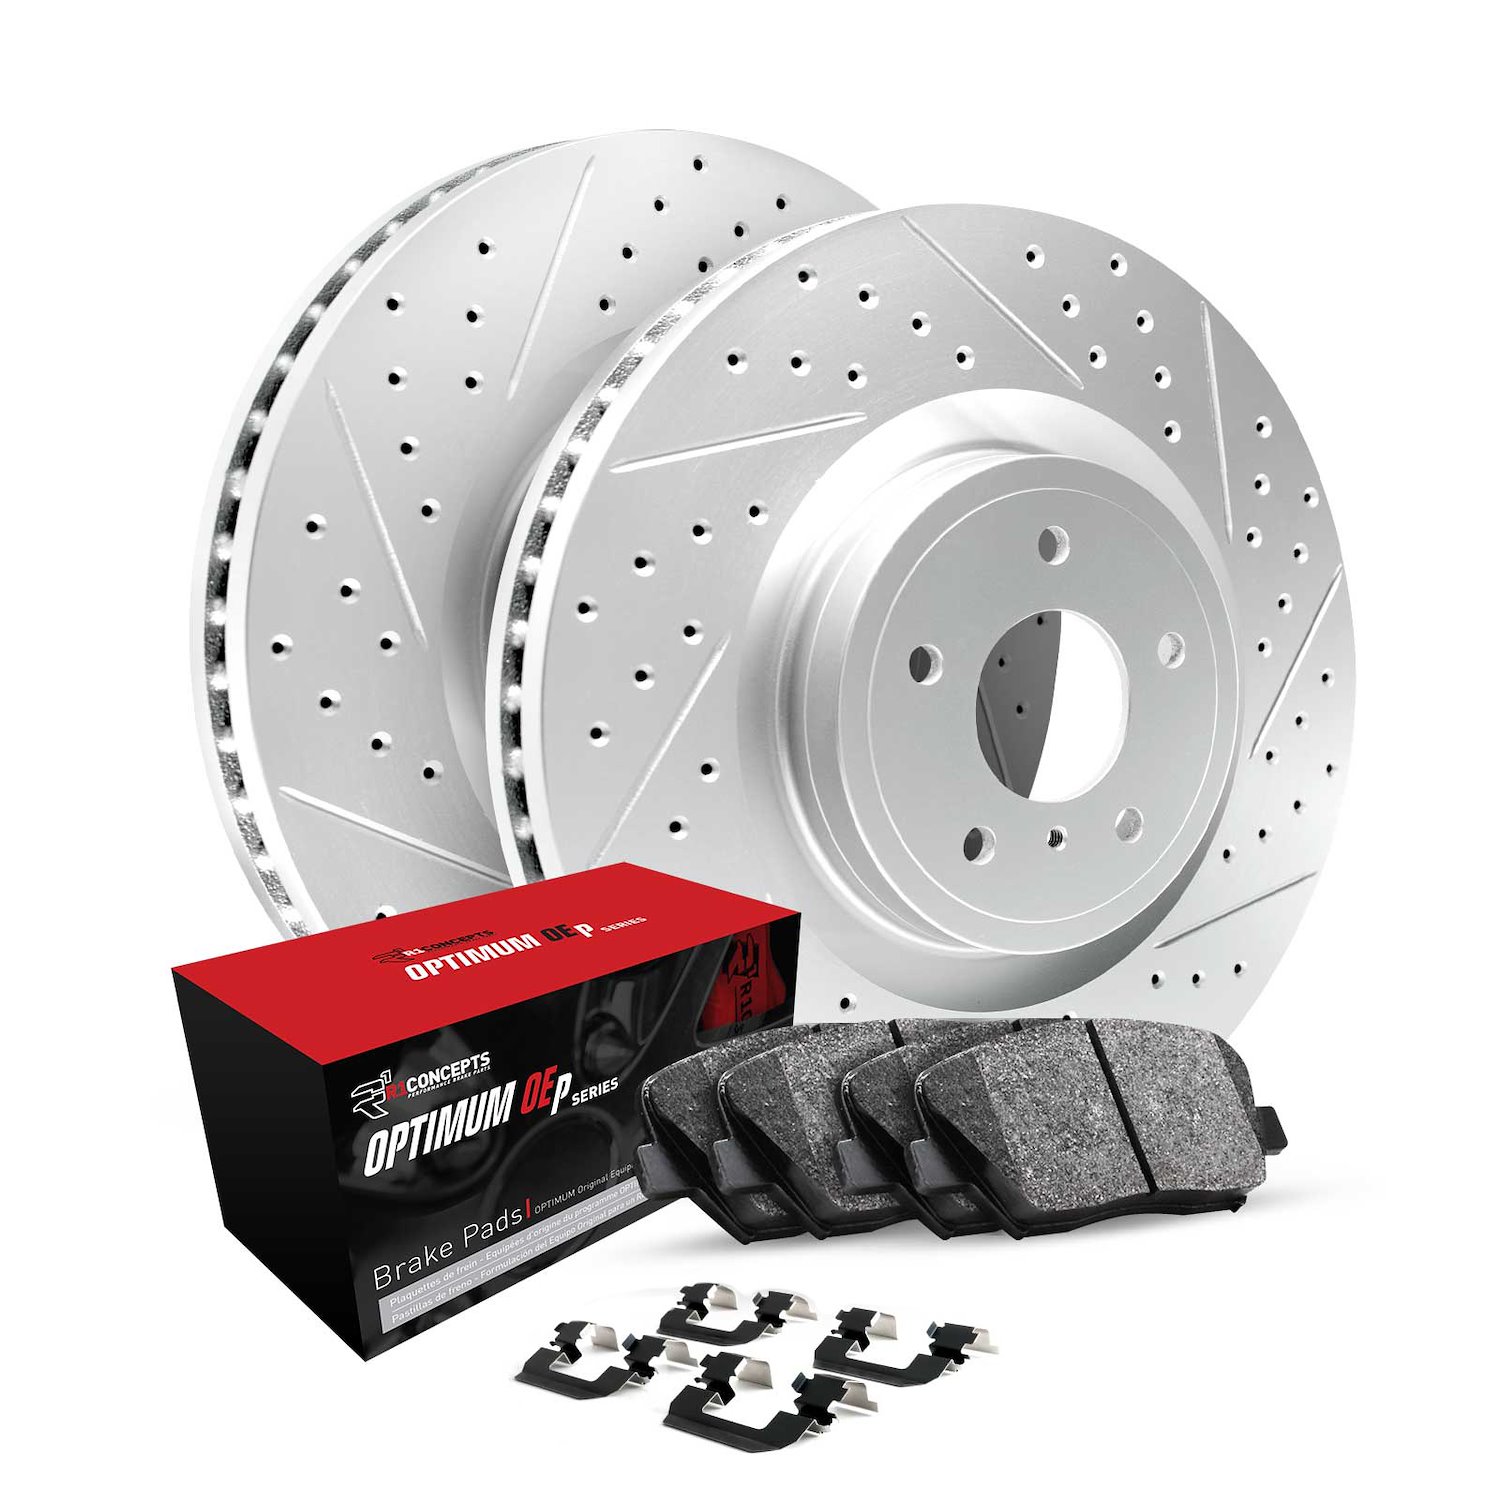 GEO-Carbon Drilled/Slotted Rotors w/Optimum OE Pads/Hardware, Fits Select Multiple Makes/Models, Position: Rear